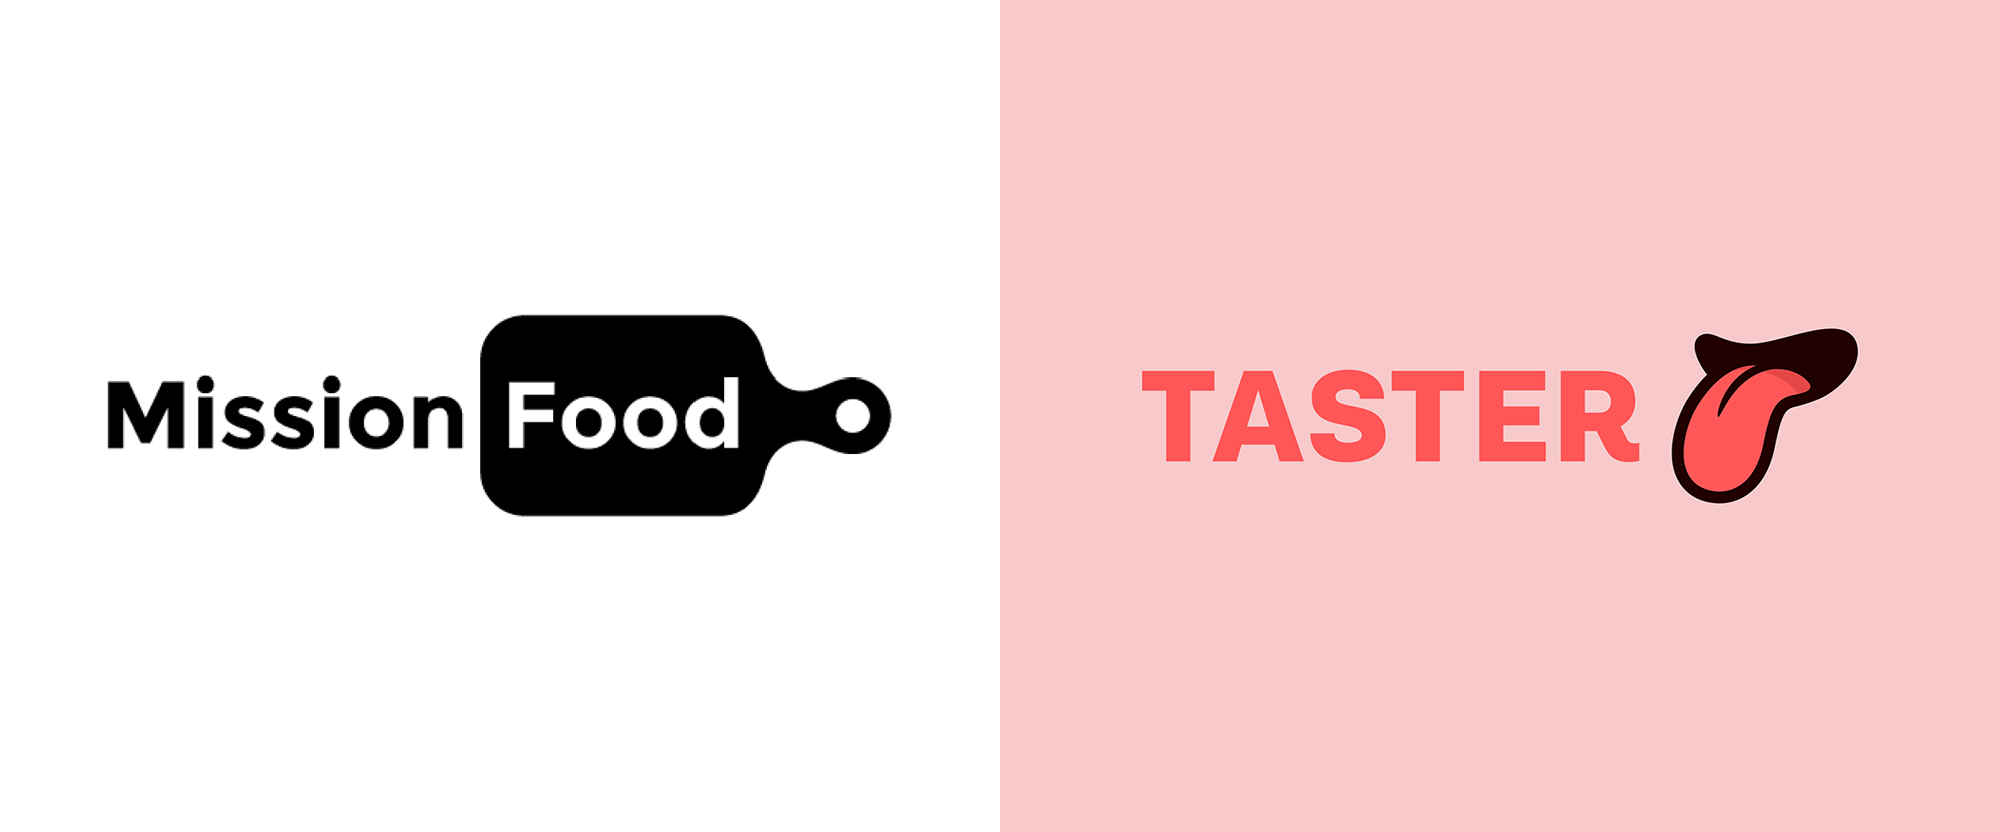 New Name, Logo, and Identity for Taster by Koto